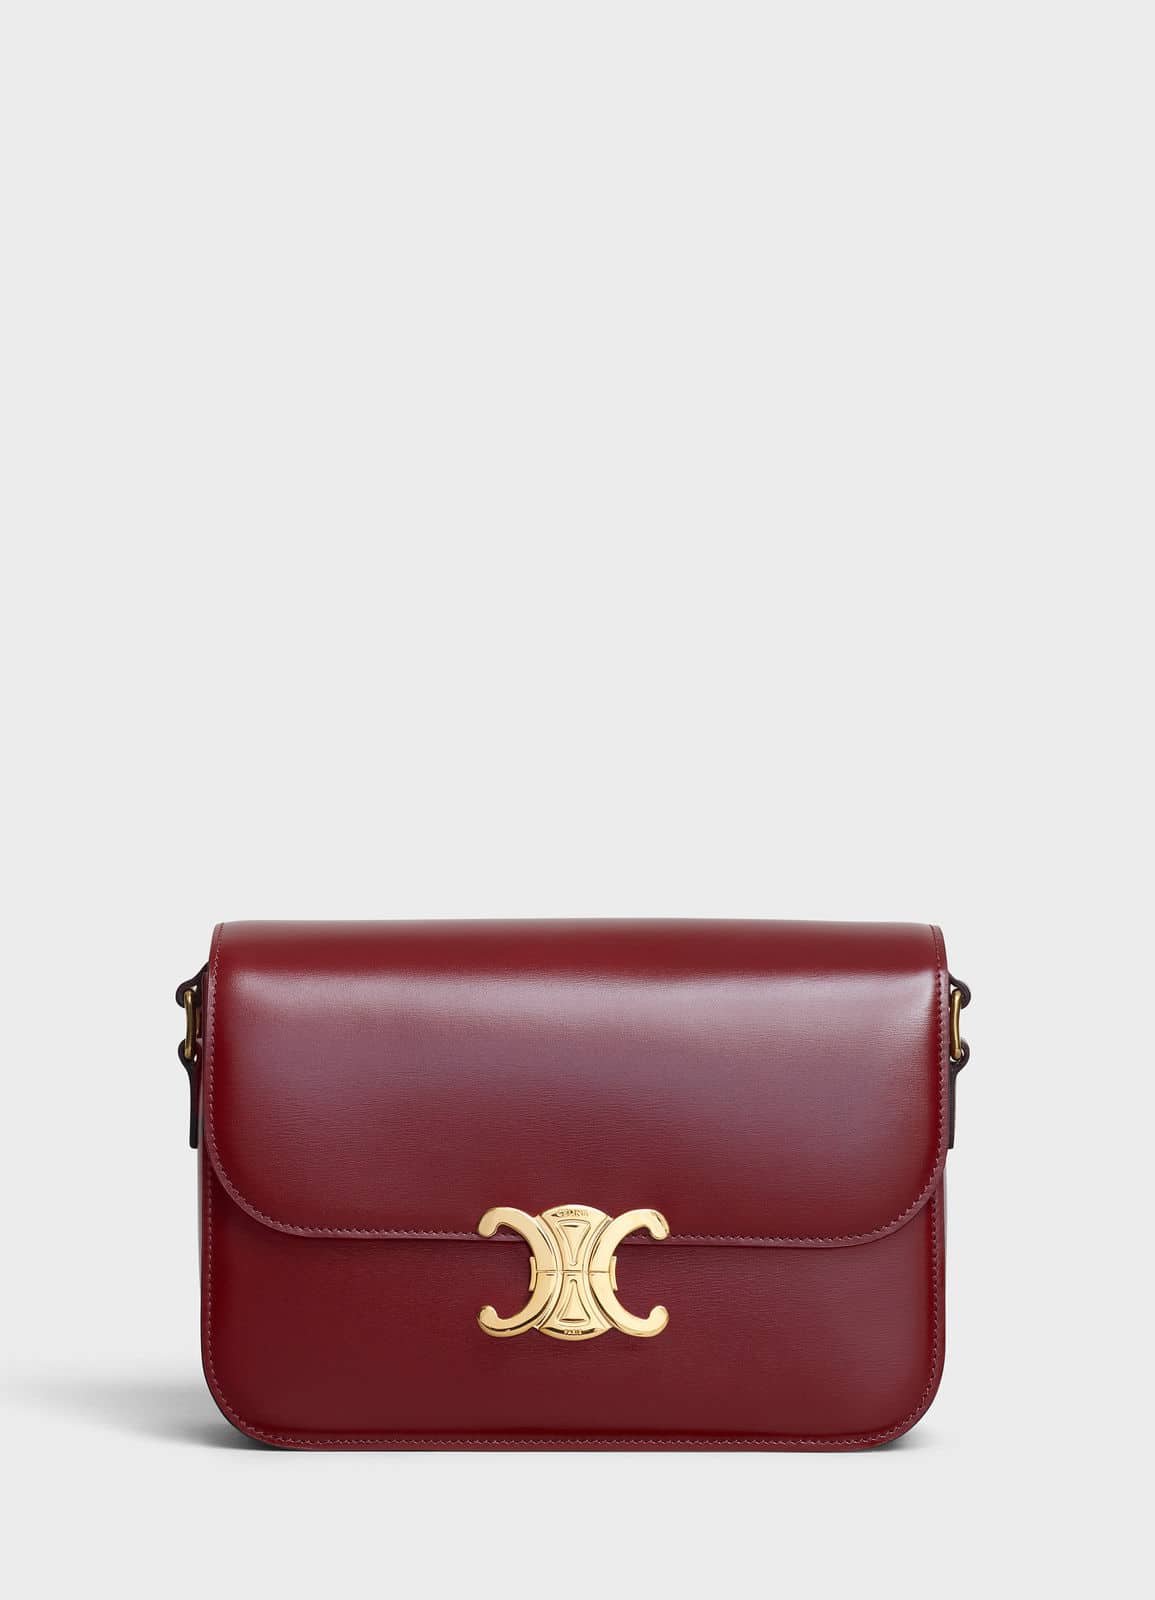 Celine Triomphe Flap Bag Reference Guide - Spotted Fashion